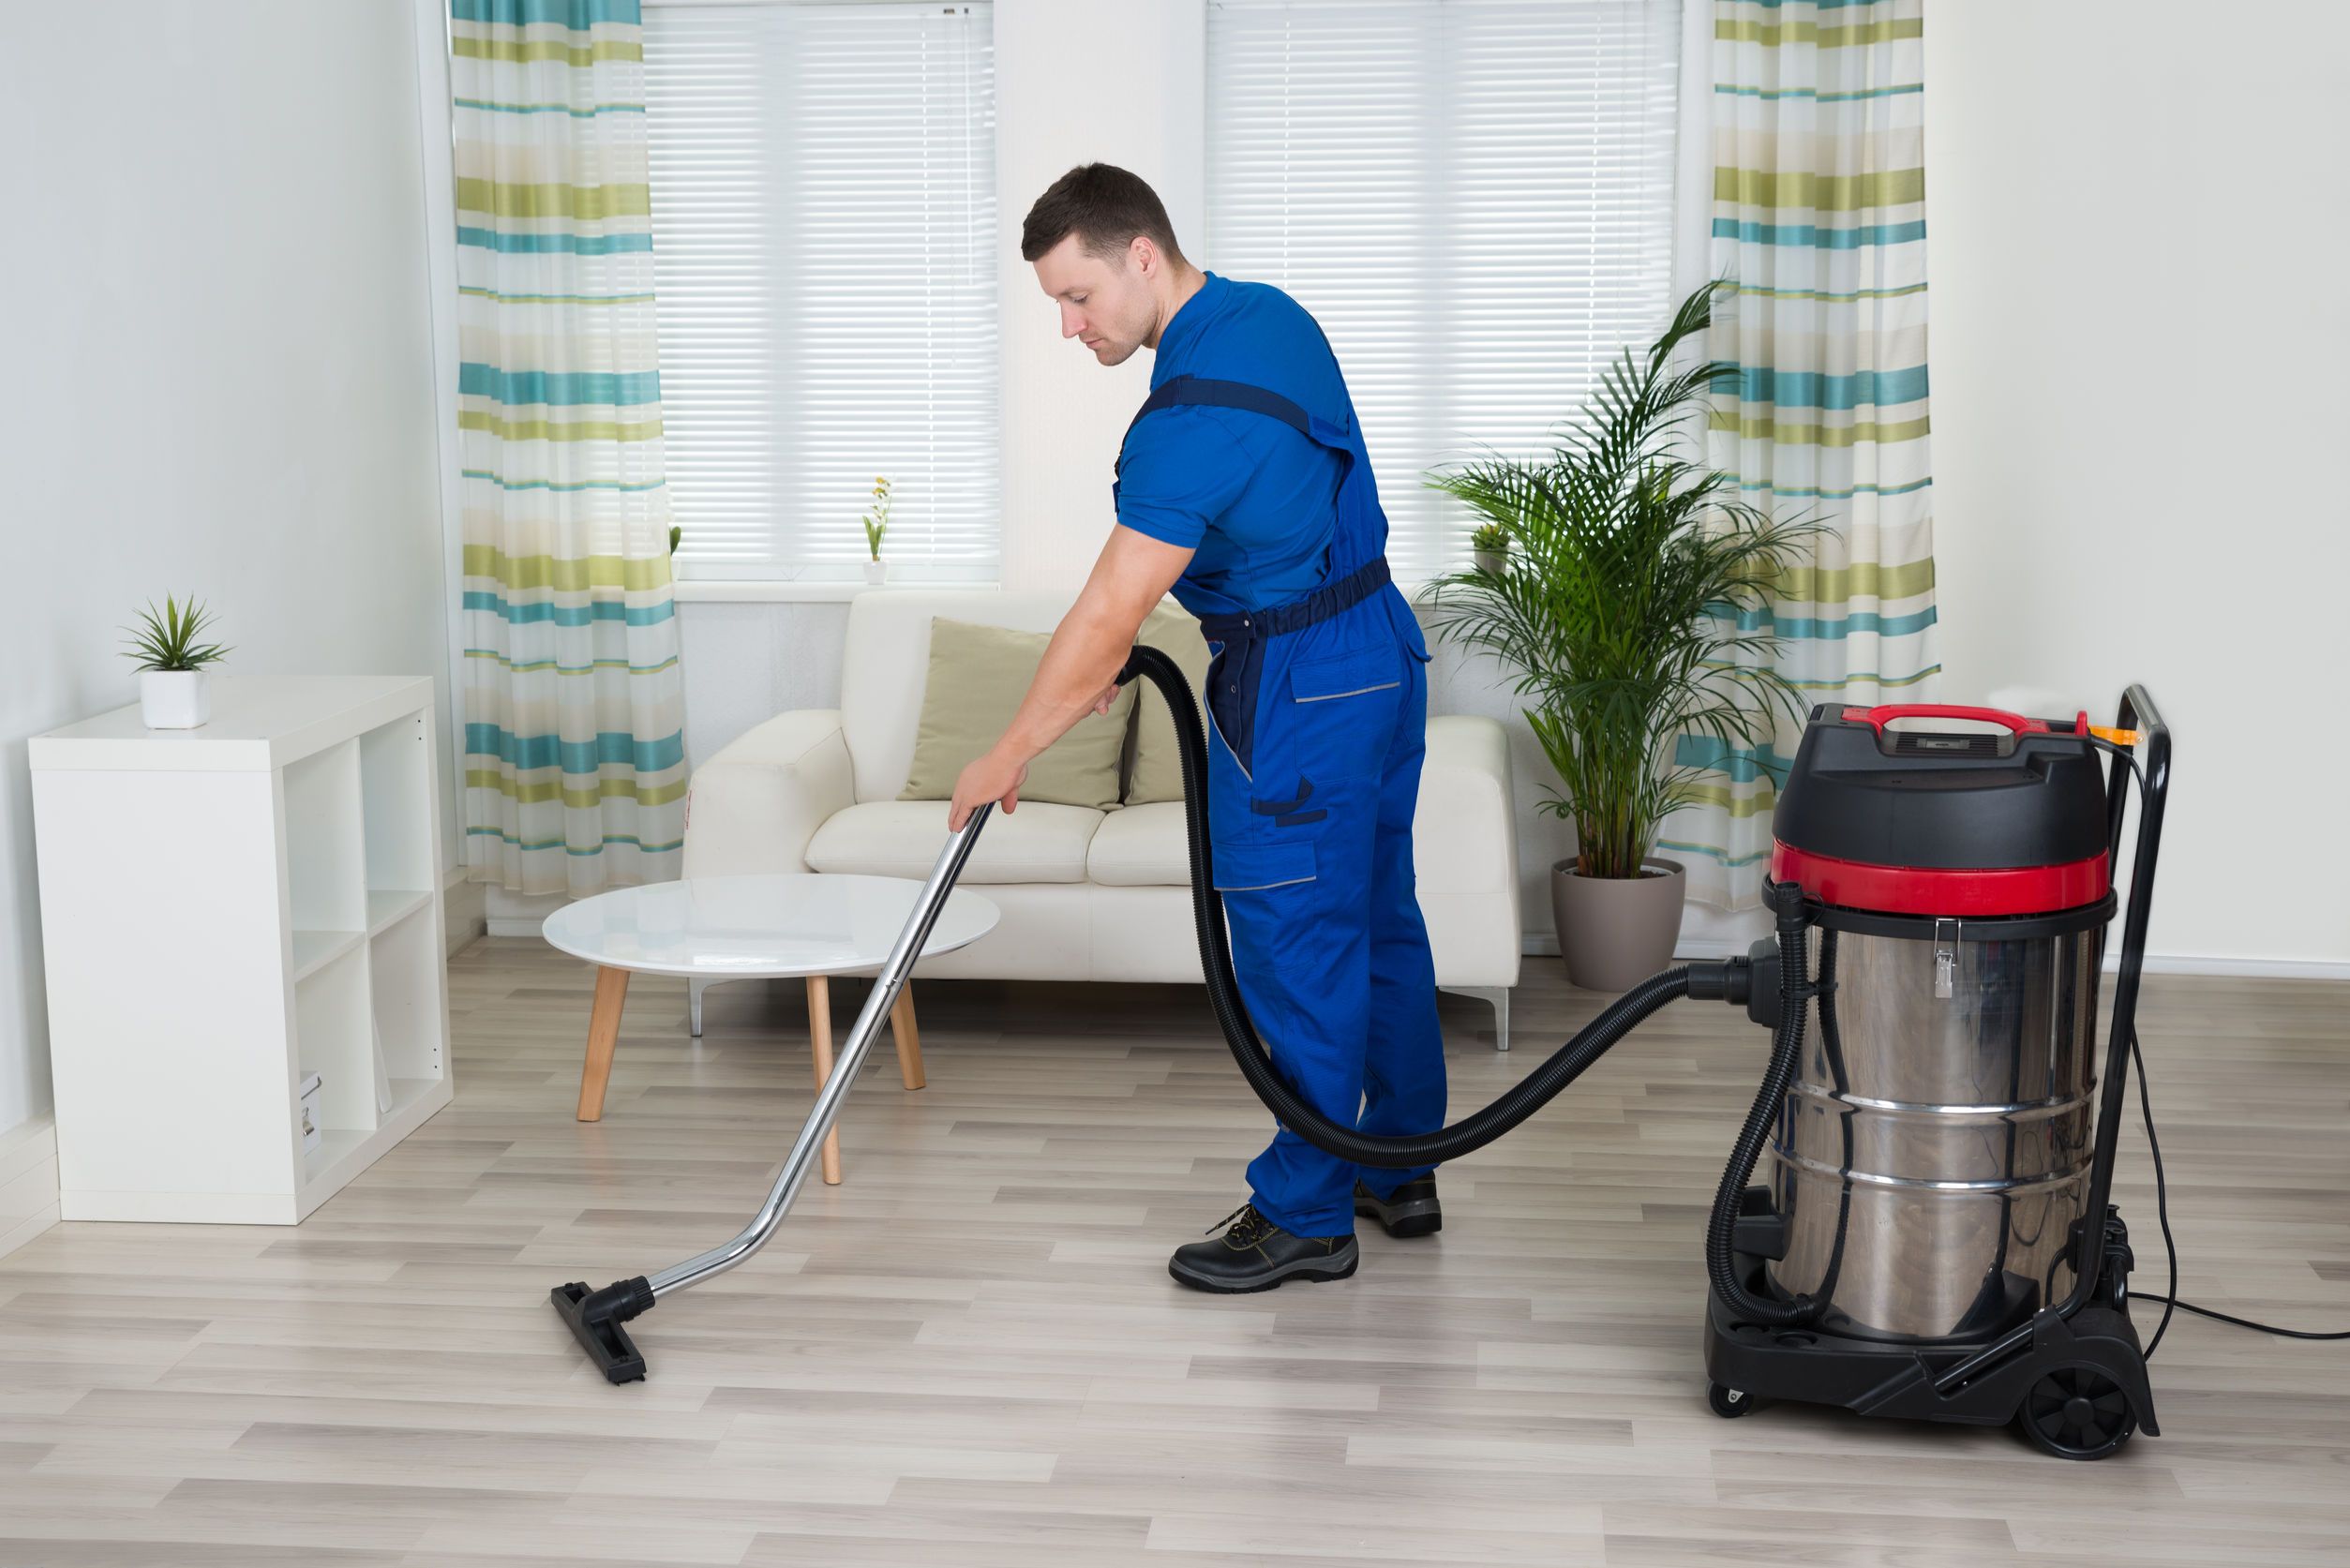 Vacuuming & Mopping Cleaning Services